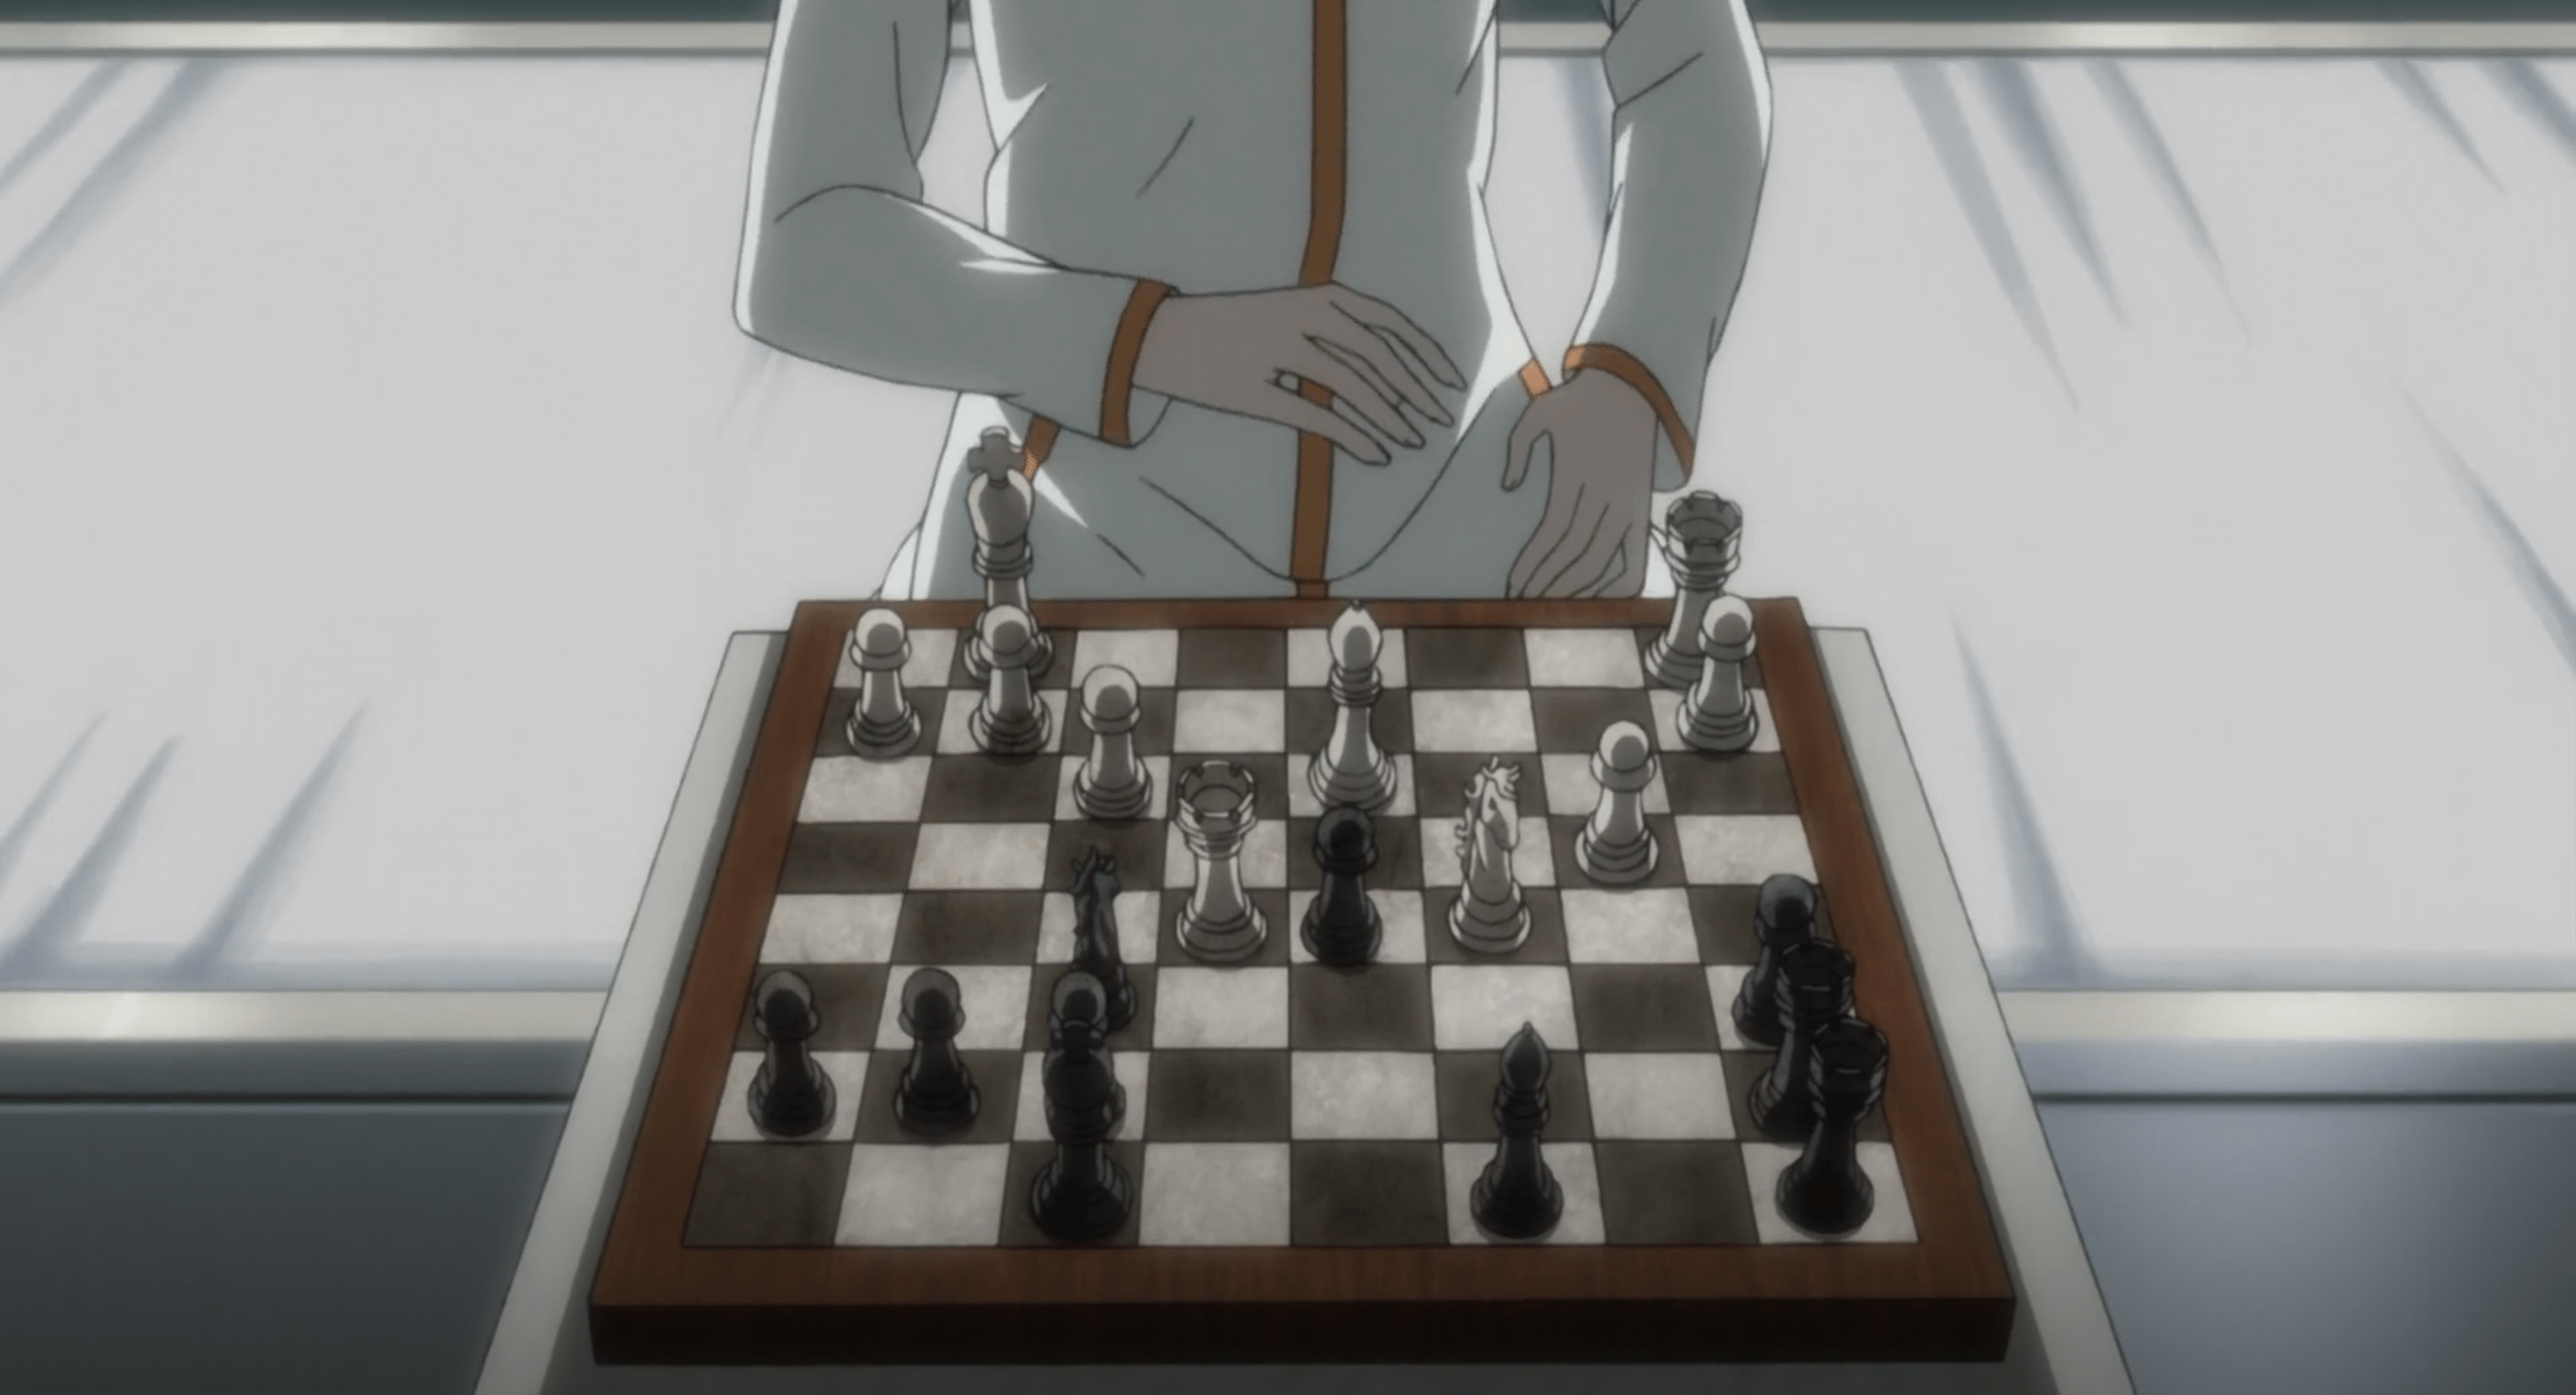 Should there be an anime about chess? - Chess Forums - Page 3 - Chess.com